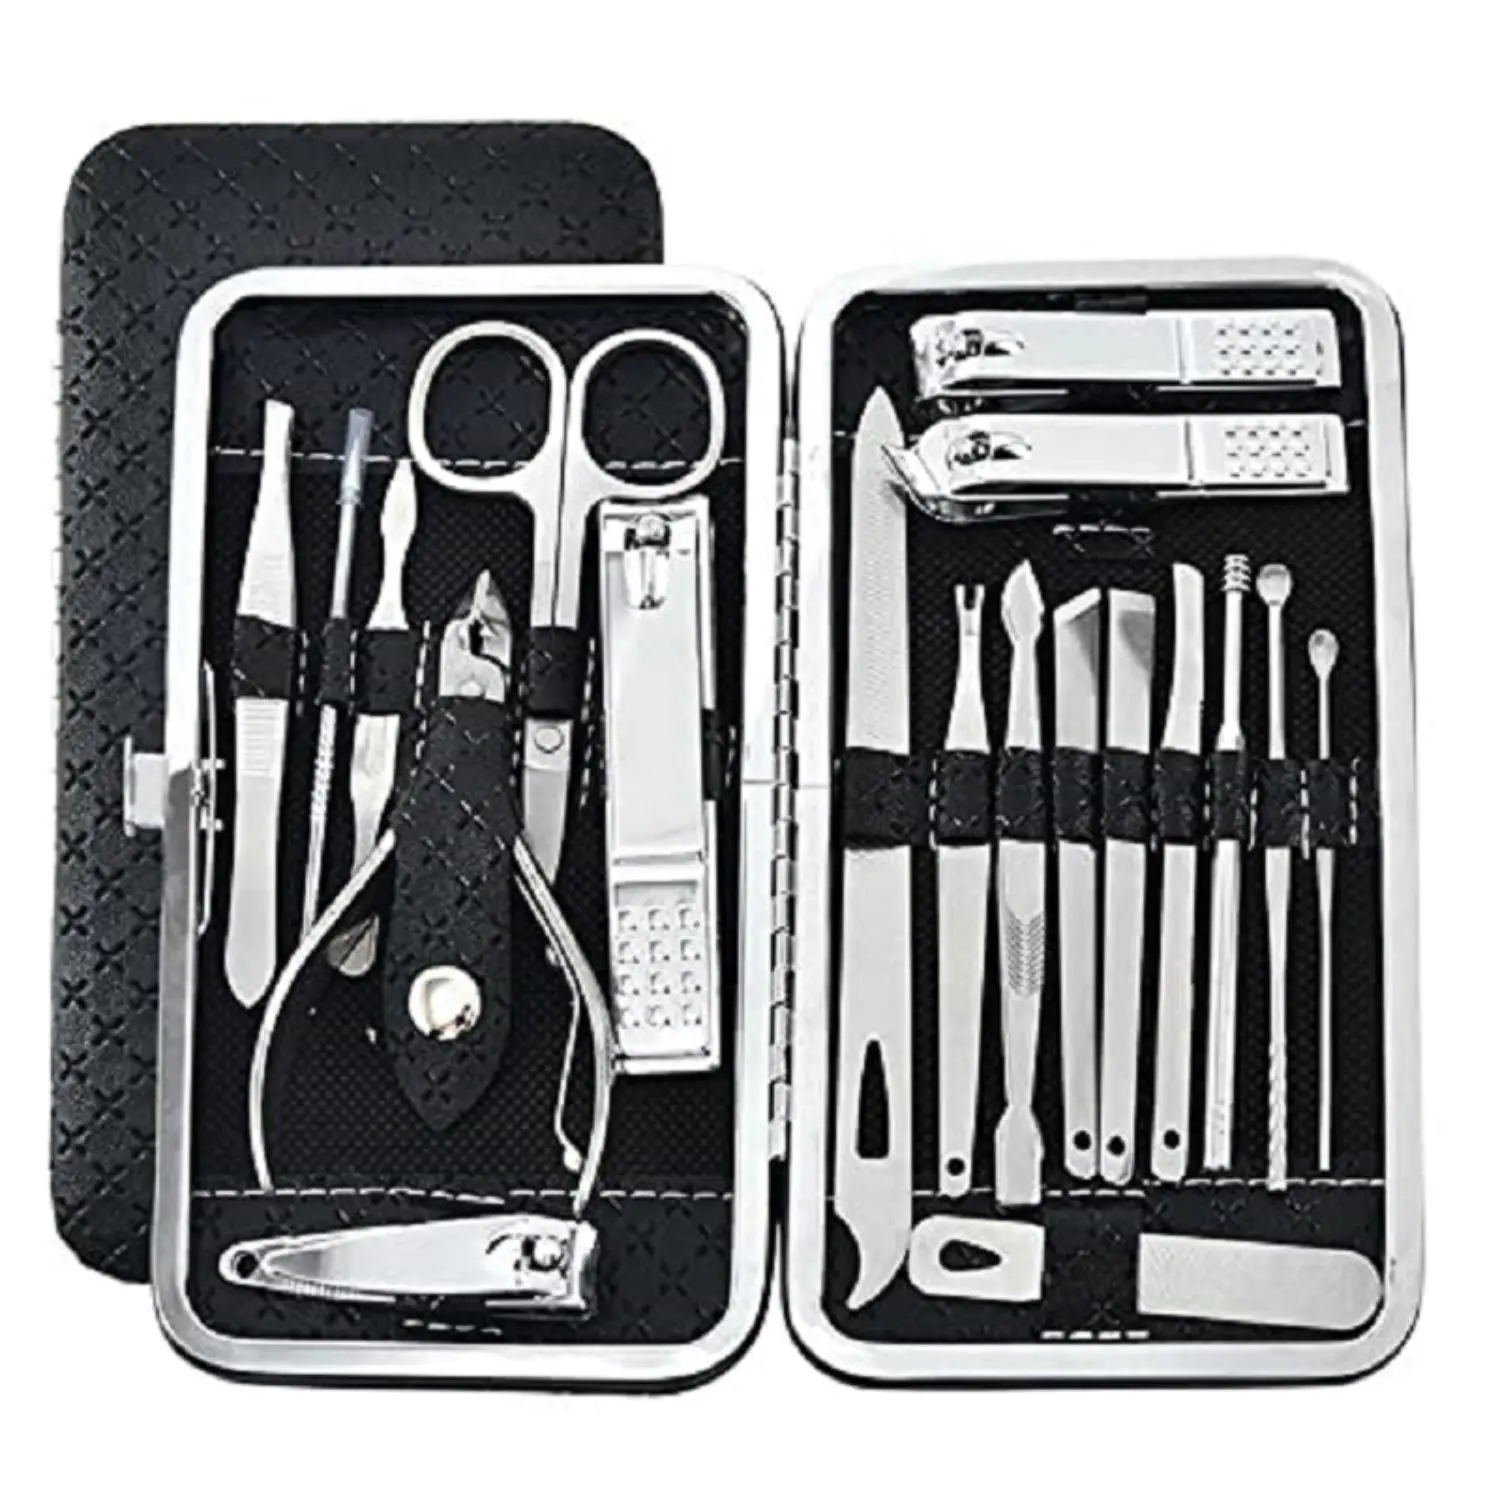 Bronson Professional Manicure and Pedicure tool set kit 19 in 1 with storage box